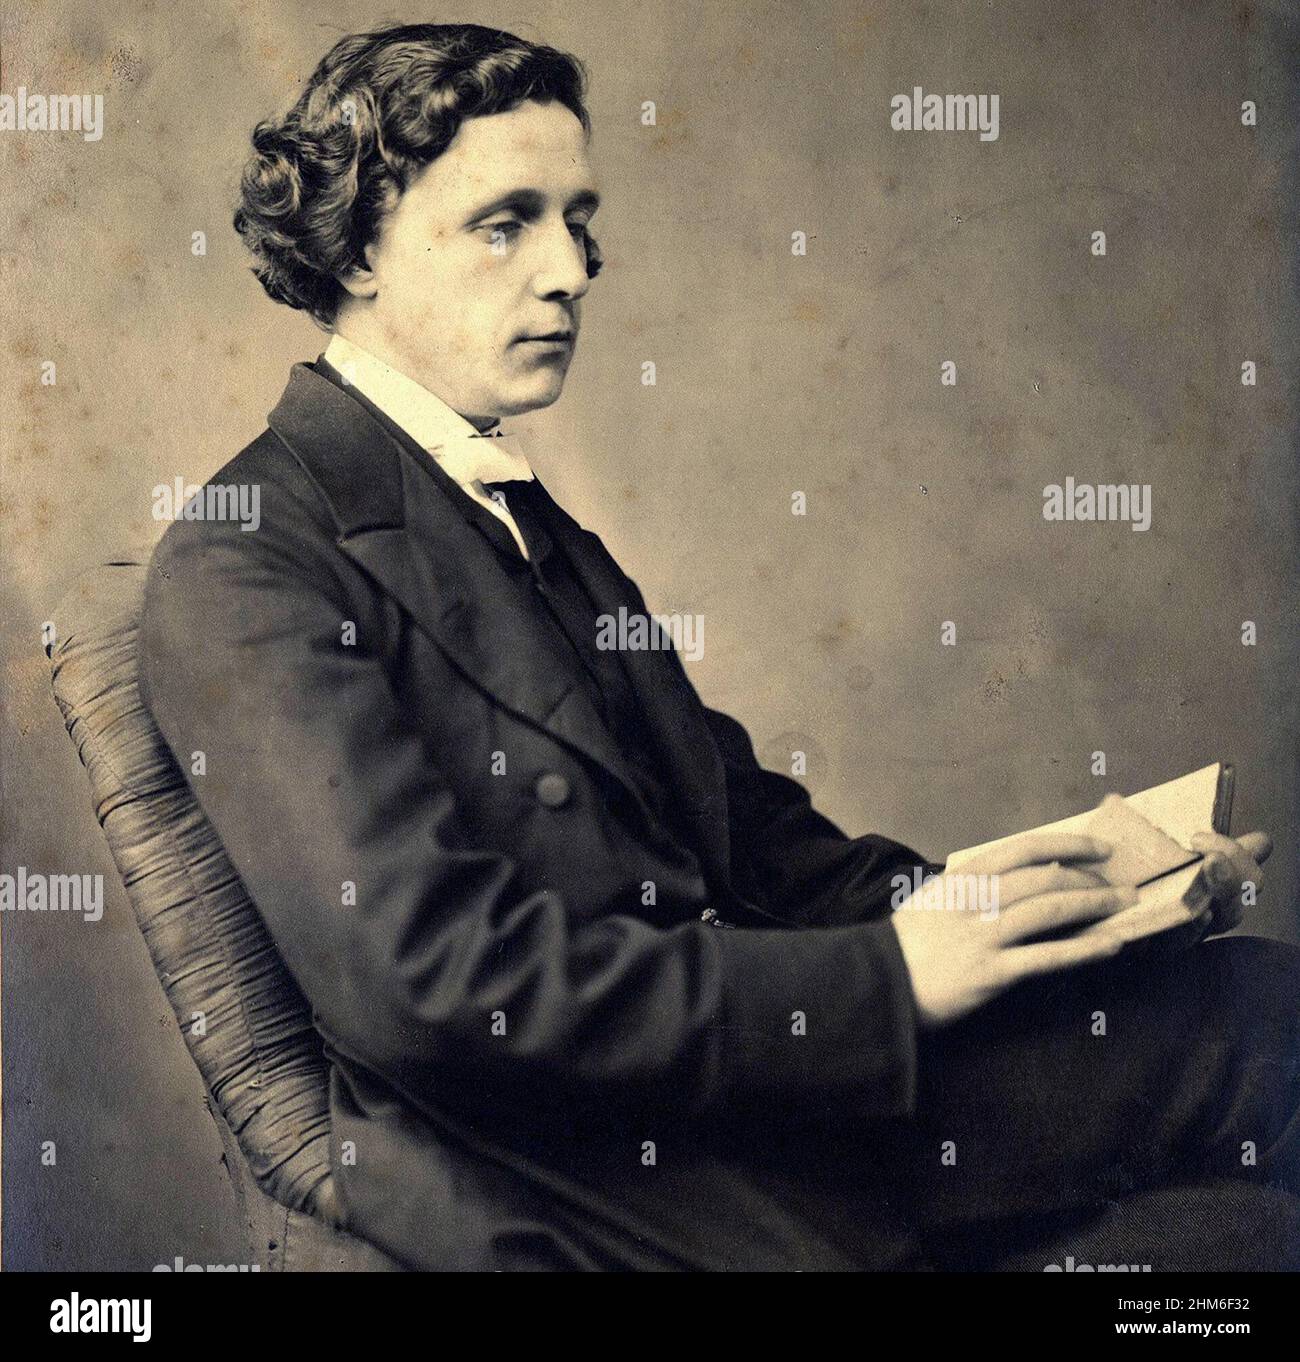 A portrait of the author Lewis Carroll (real name Charles Lutwidge Dodgson), author of Alice in Wonderland, from 1863 when he was 31 years old Stock Photo